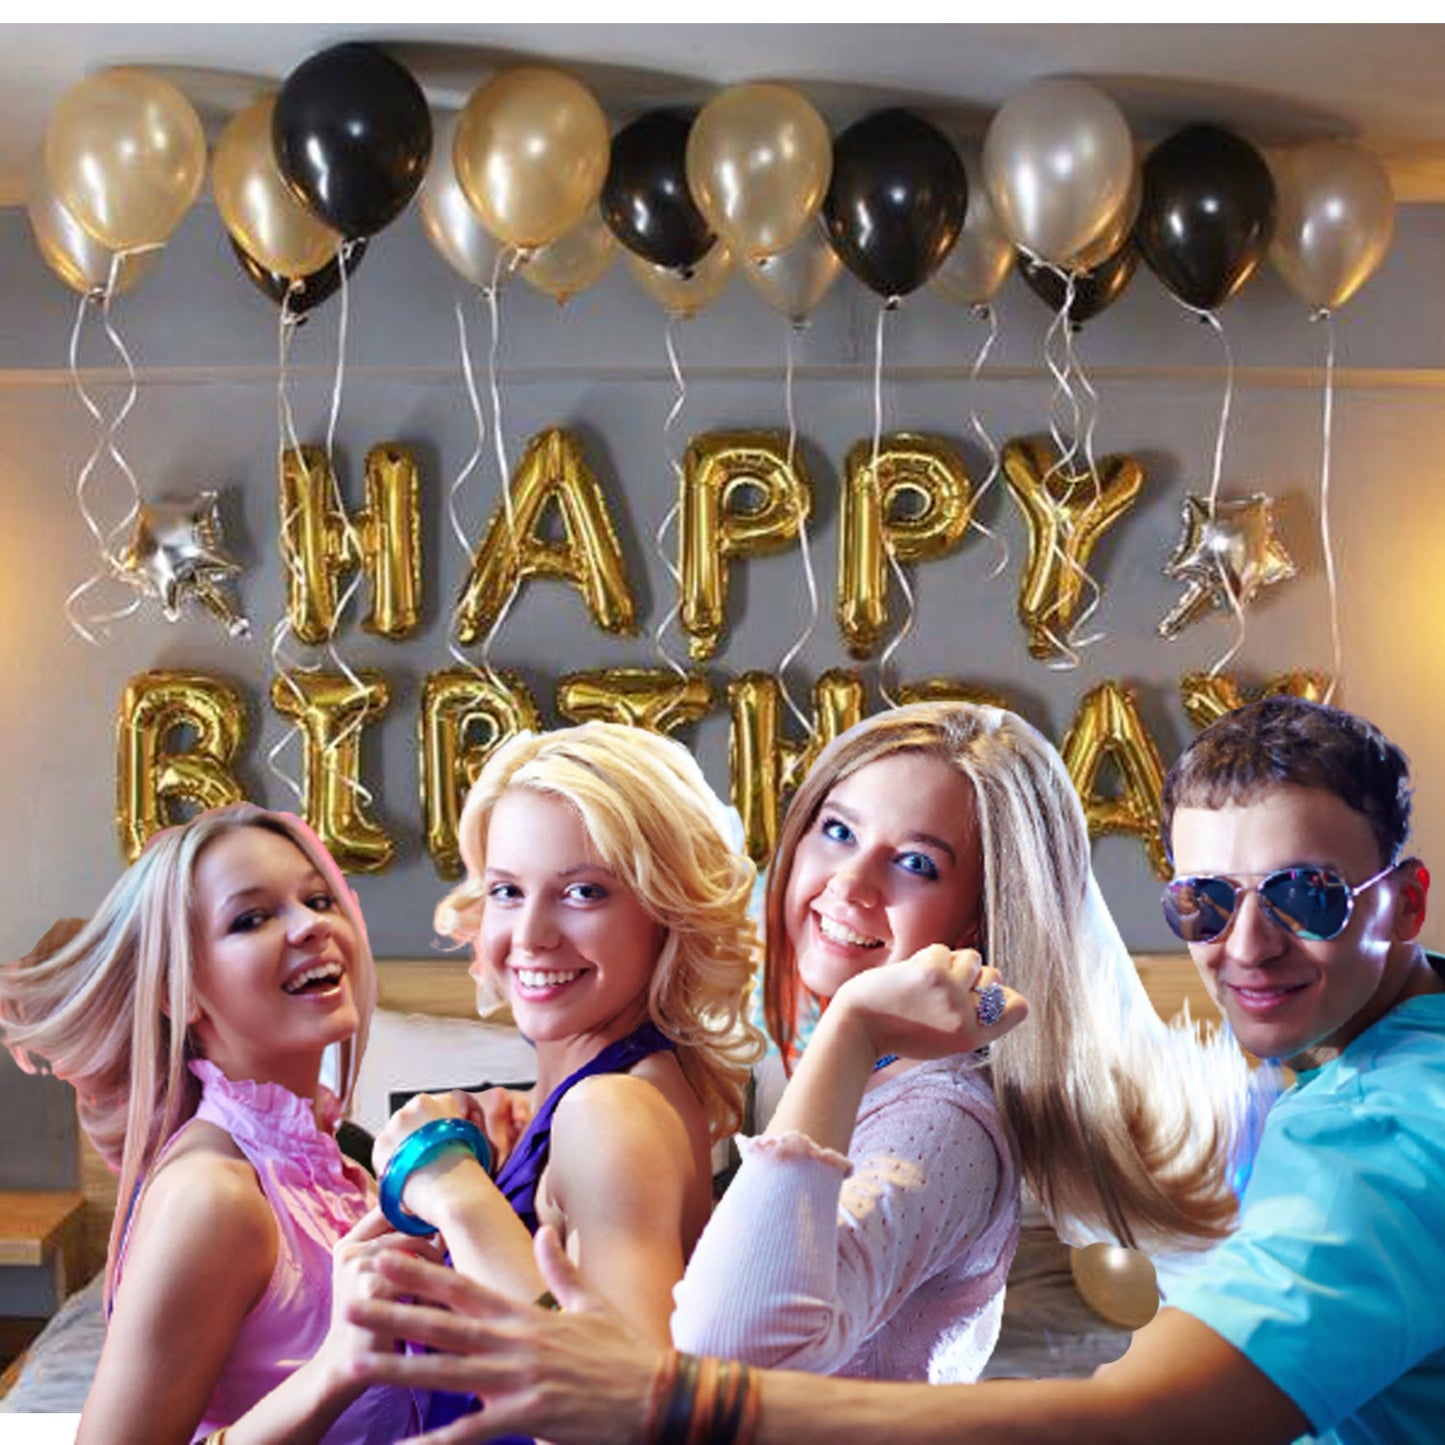 Golden Birthday Balloons for Decoration – Pack of 36 Pcs – Happy Birthday Foil, Small Star Foil, Metallic & Latex Balloons- 1st, 10th, 18th, 21st, 25th, 30th, 40th, 50th Birthday - CherishX Partystore